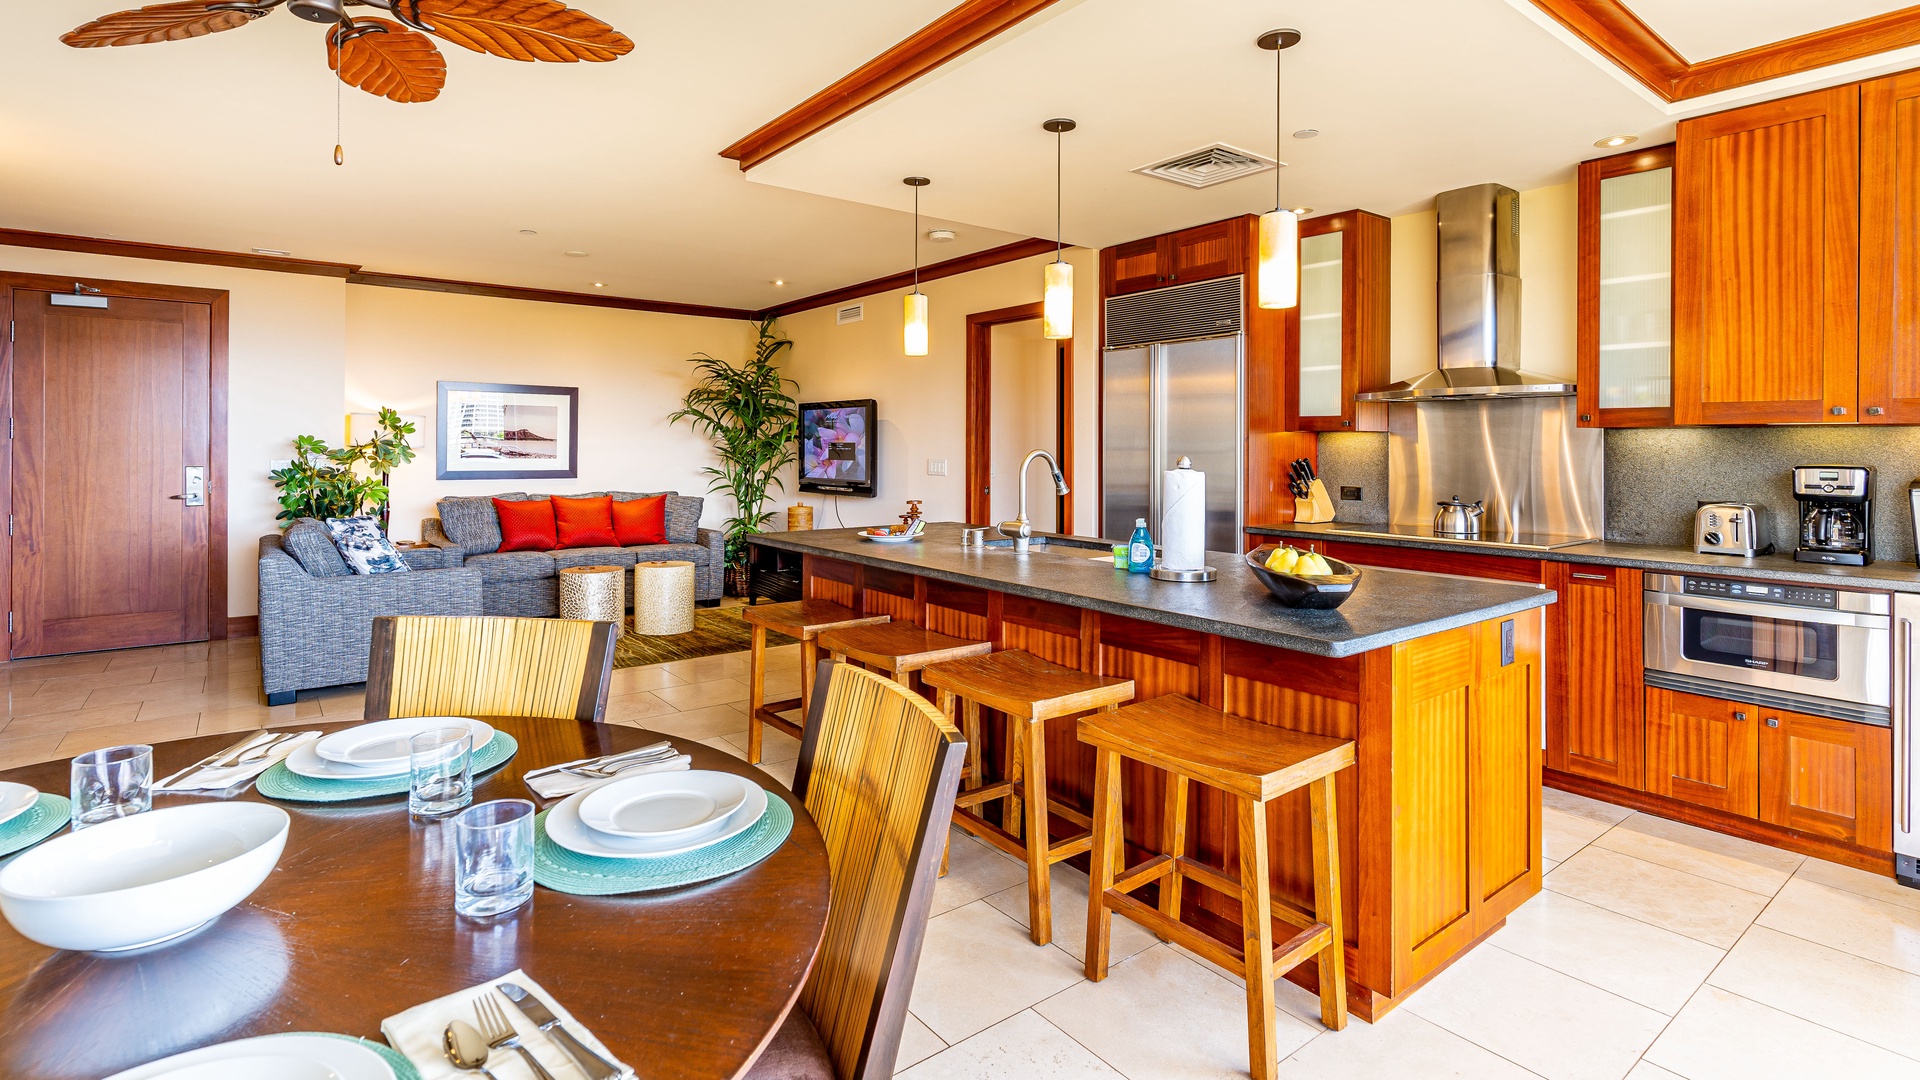 Kapolei Vacation Rentals, Ko Olina Beach Villas B706 - Relax in the living room area and listen to the sounds of the island.